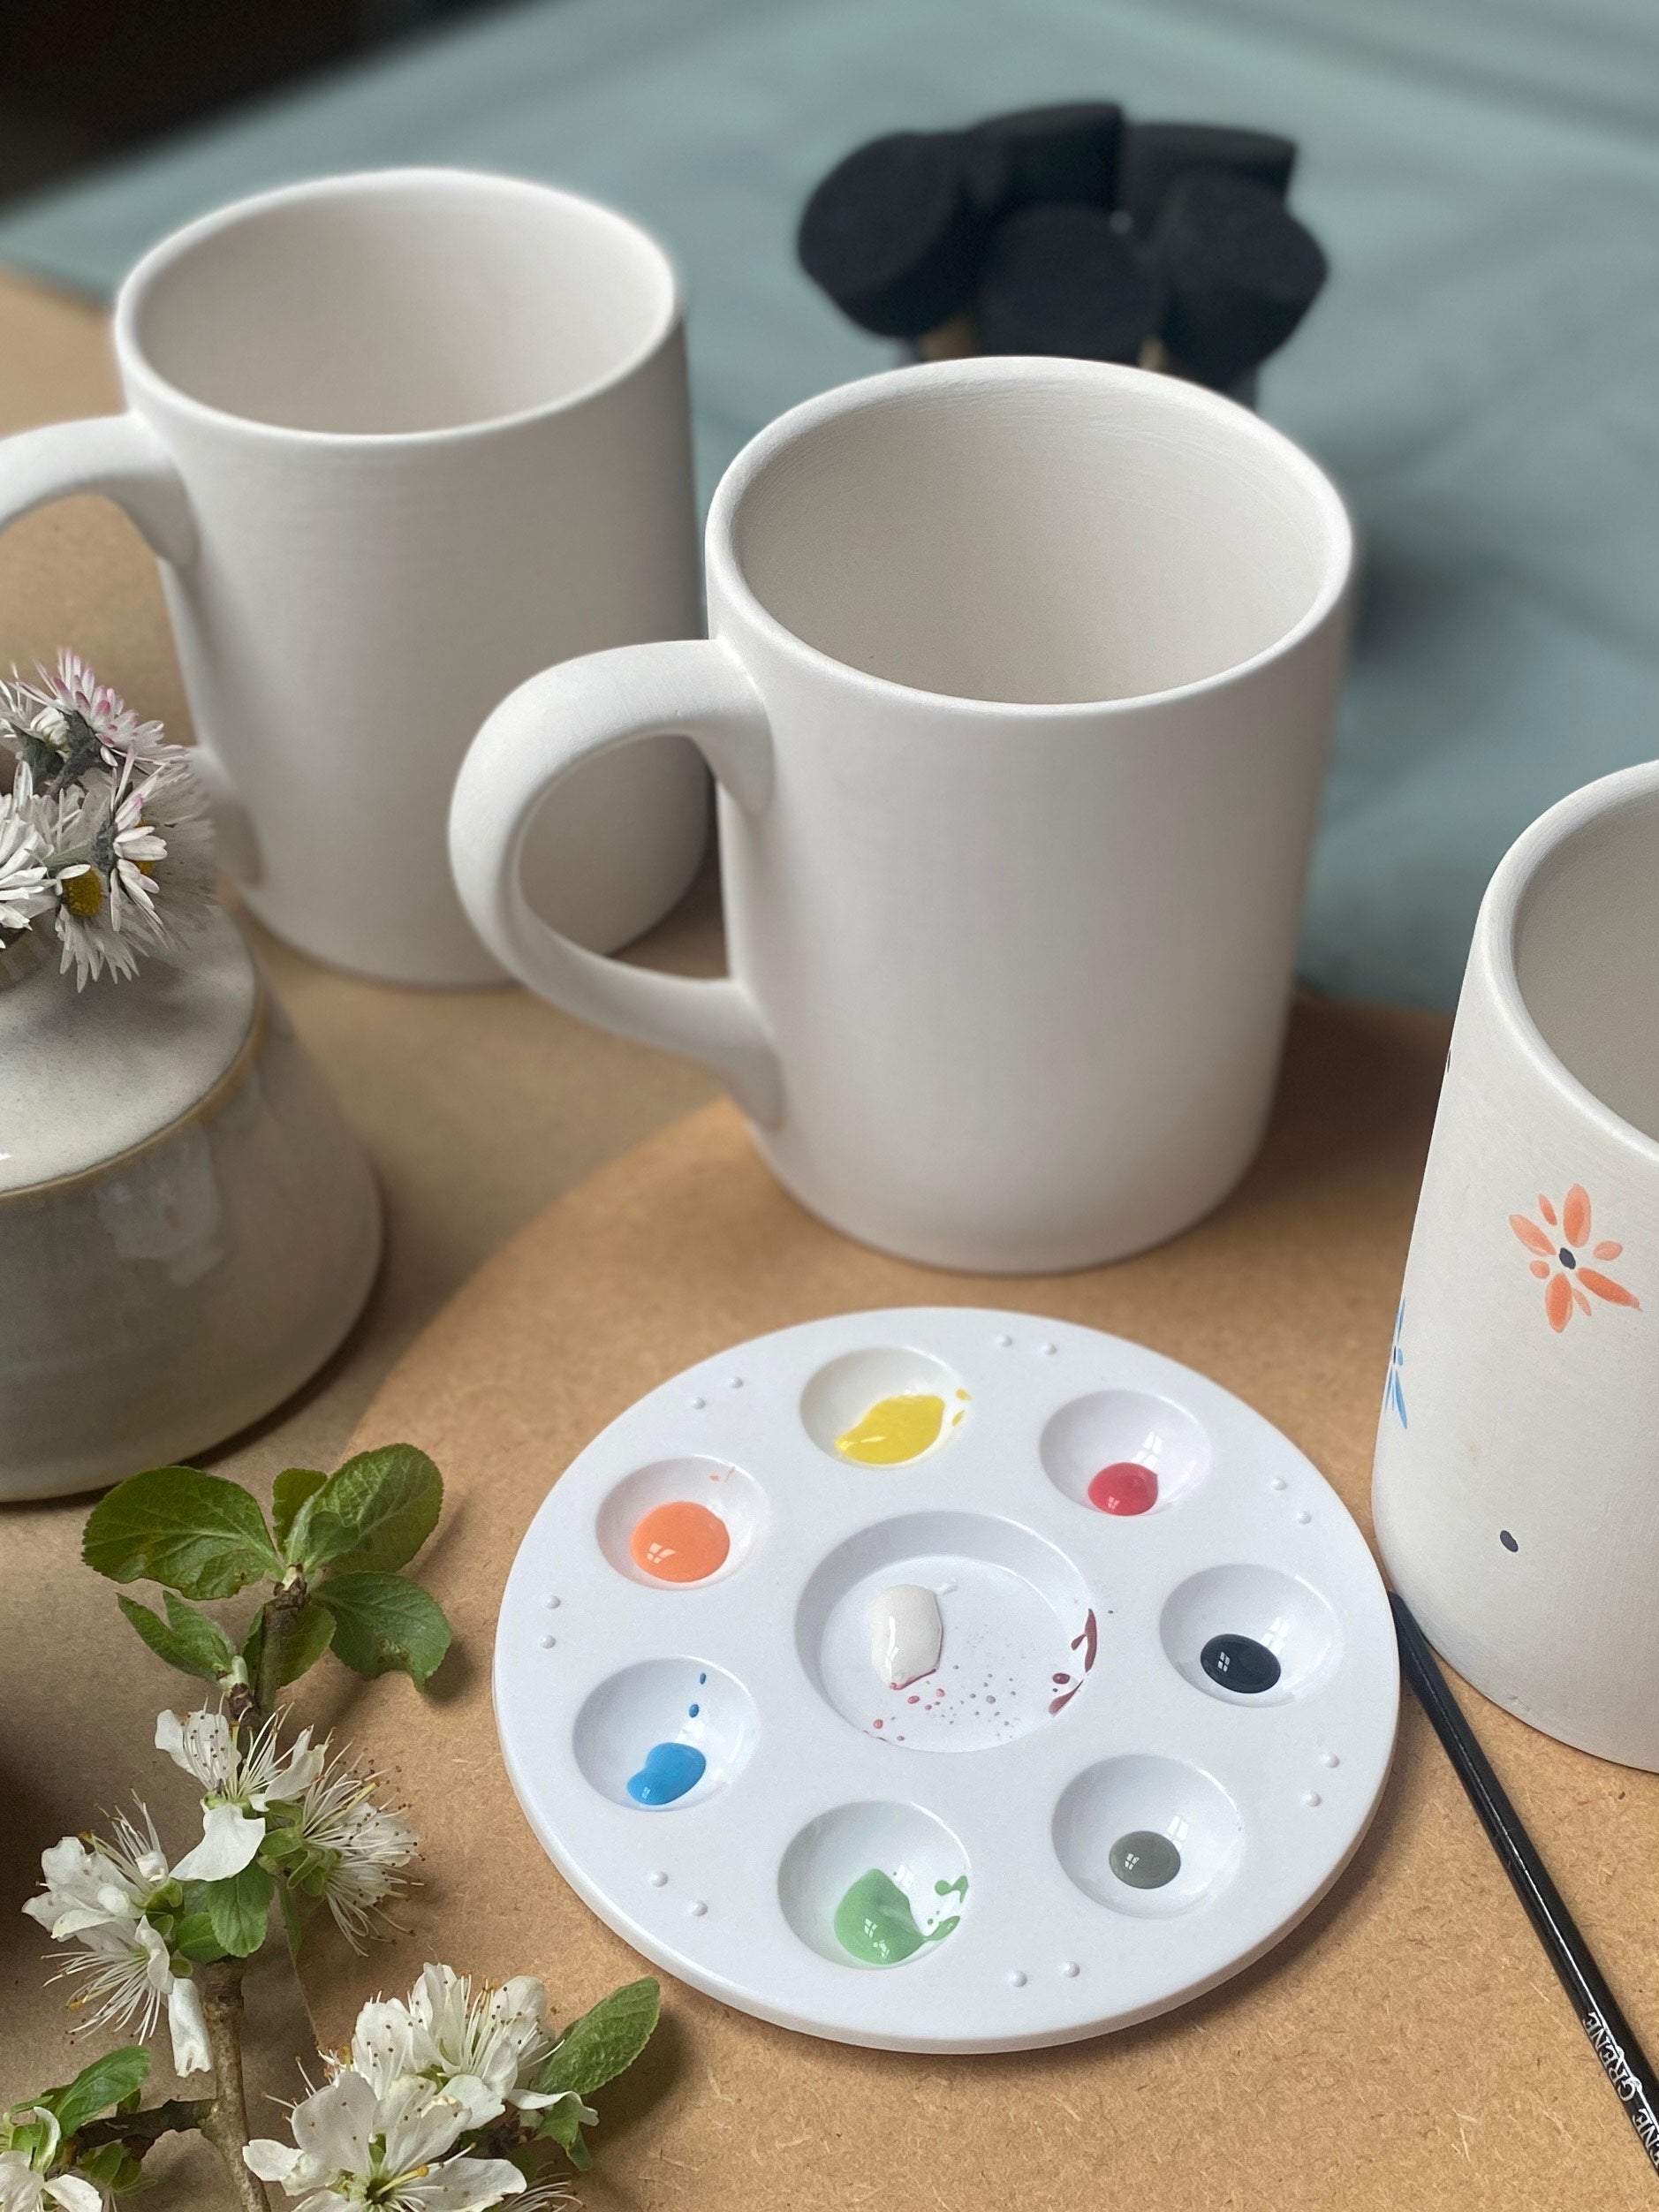 Reimagine | Wildflower Painting on Pottery - April 6th